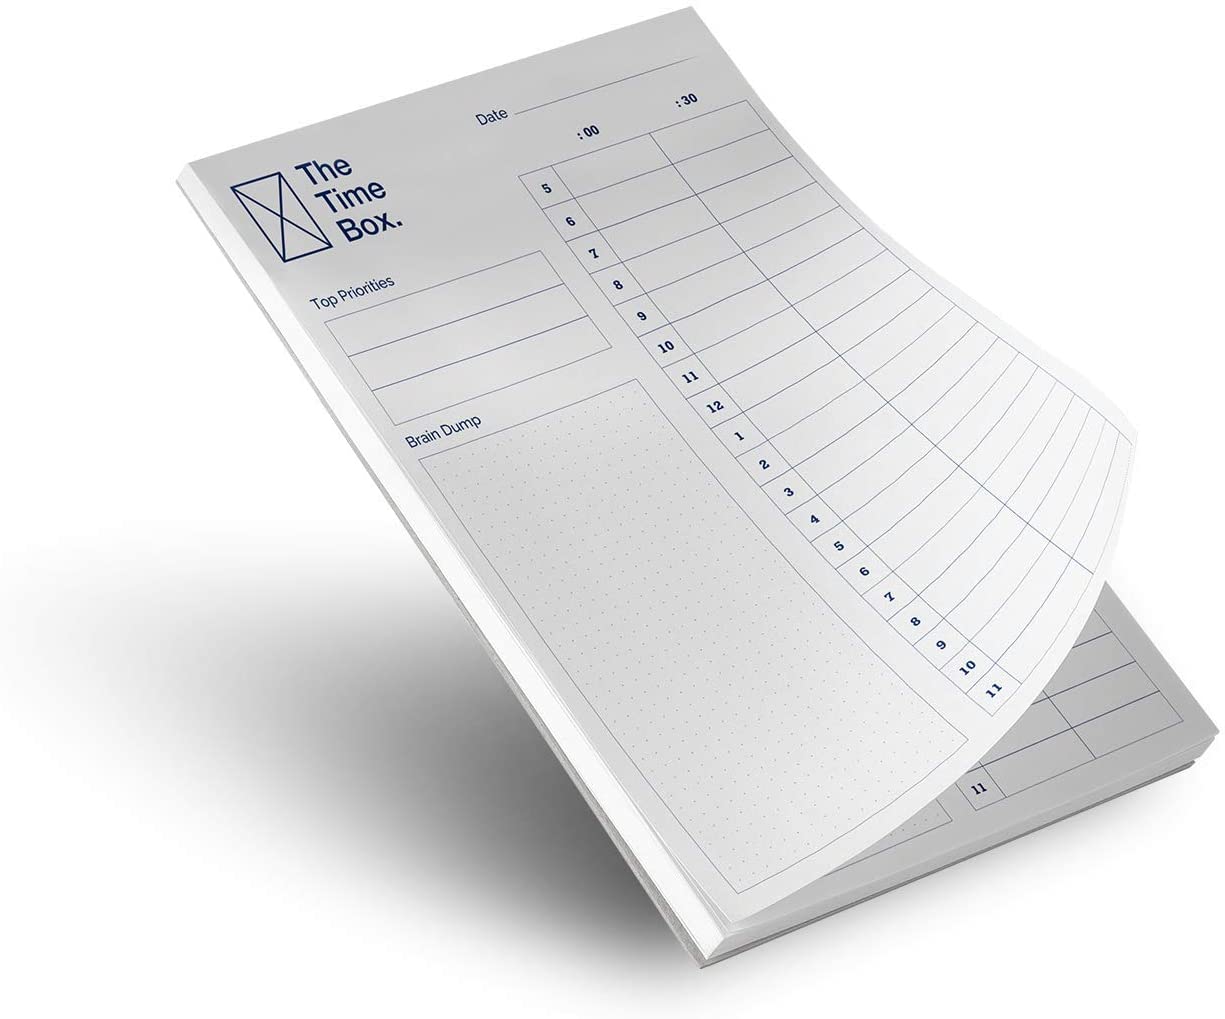 The Time Box Notepad